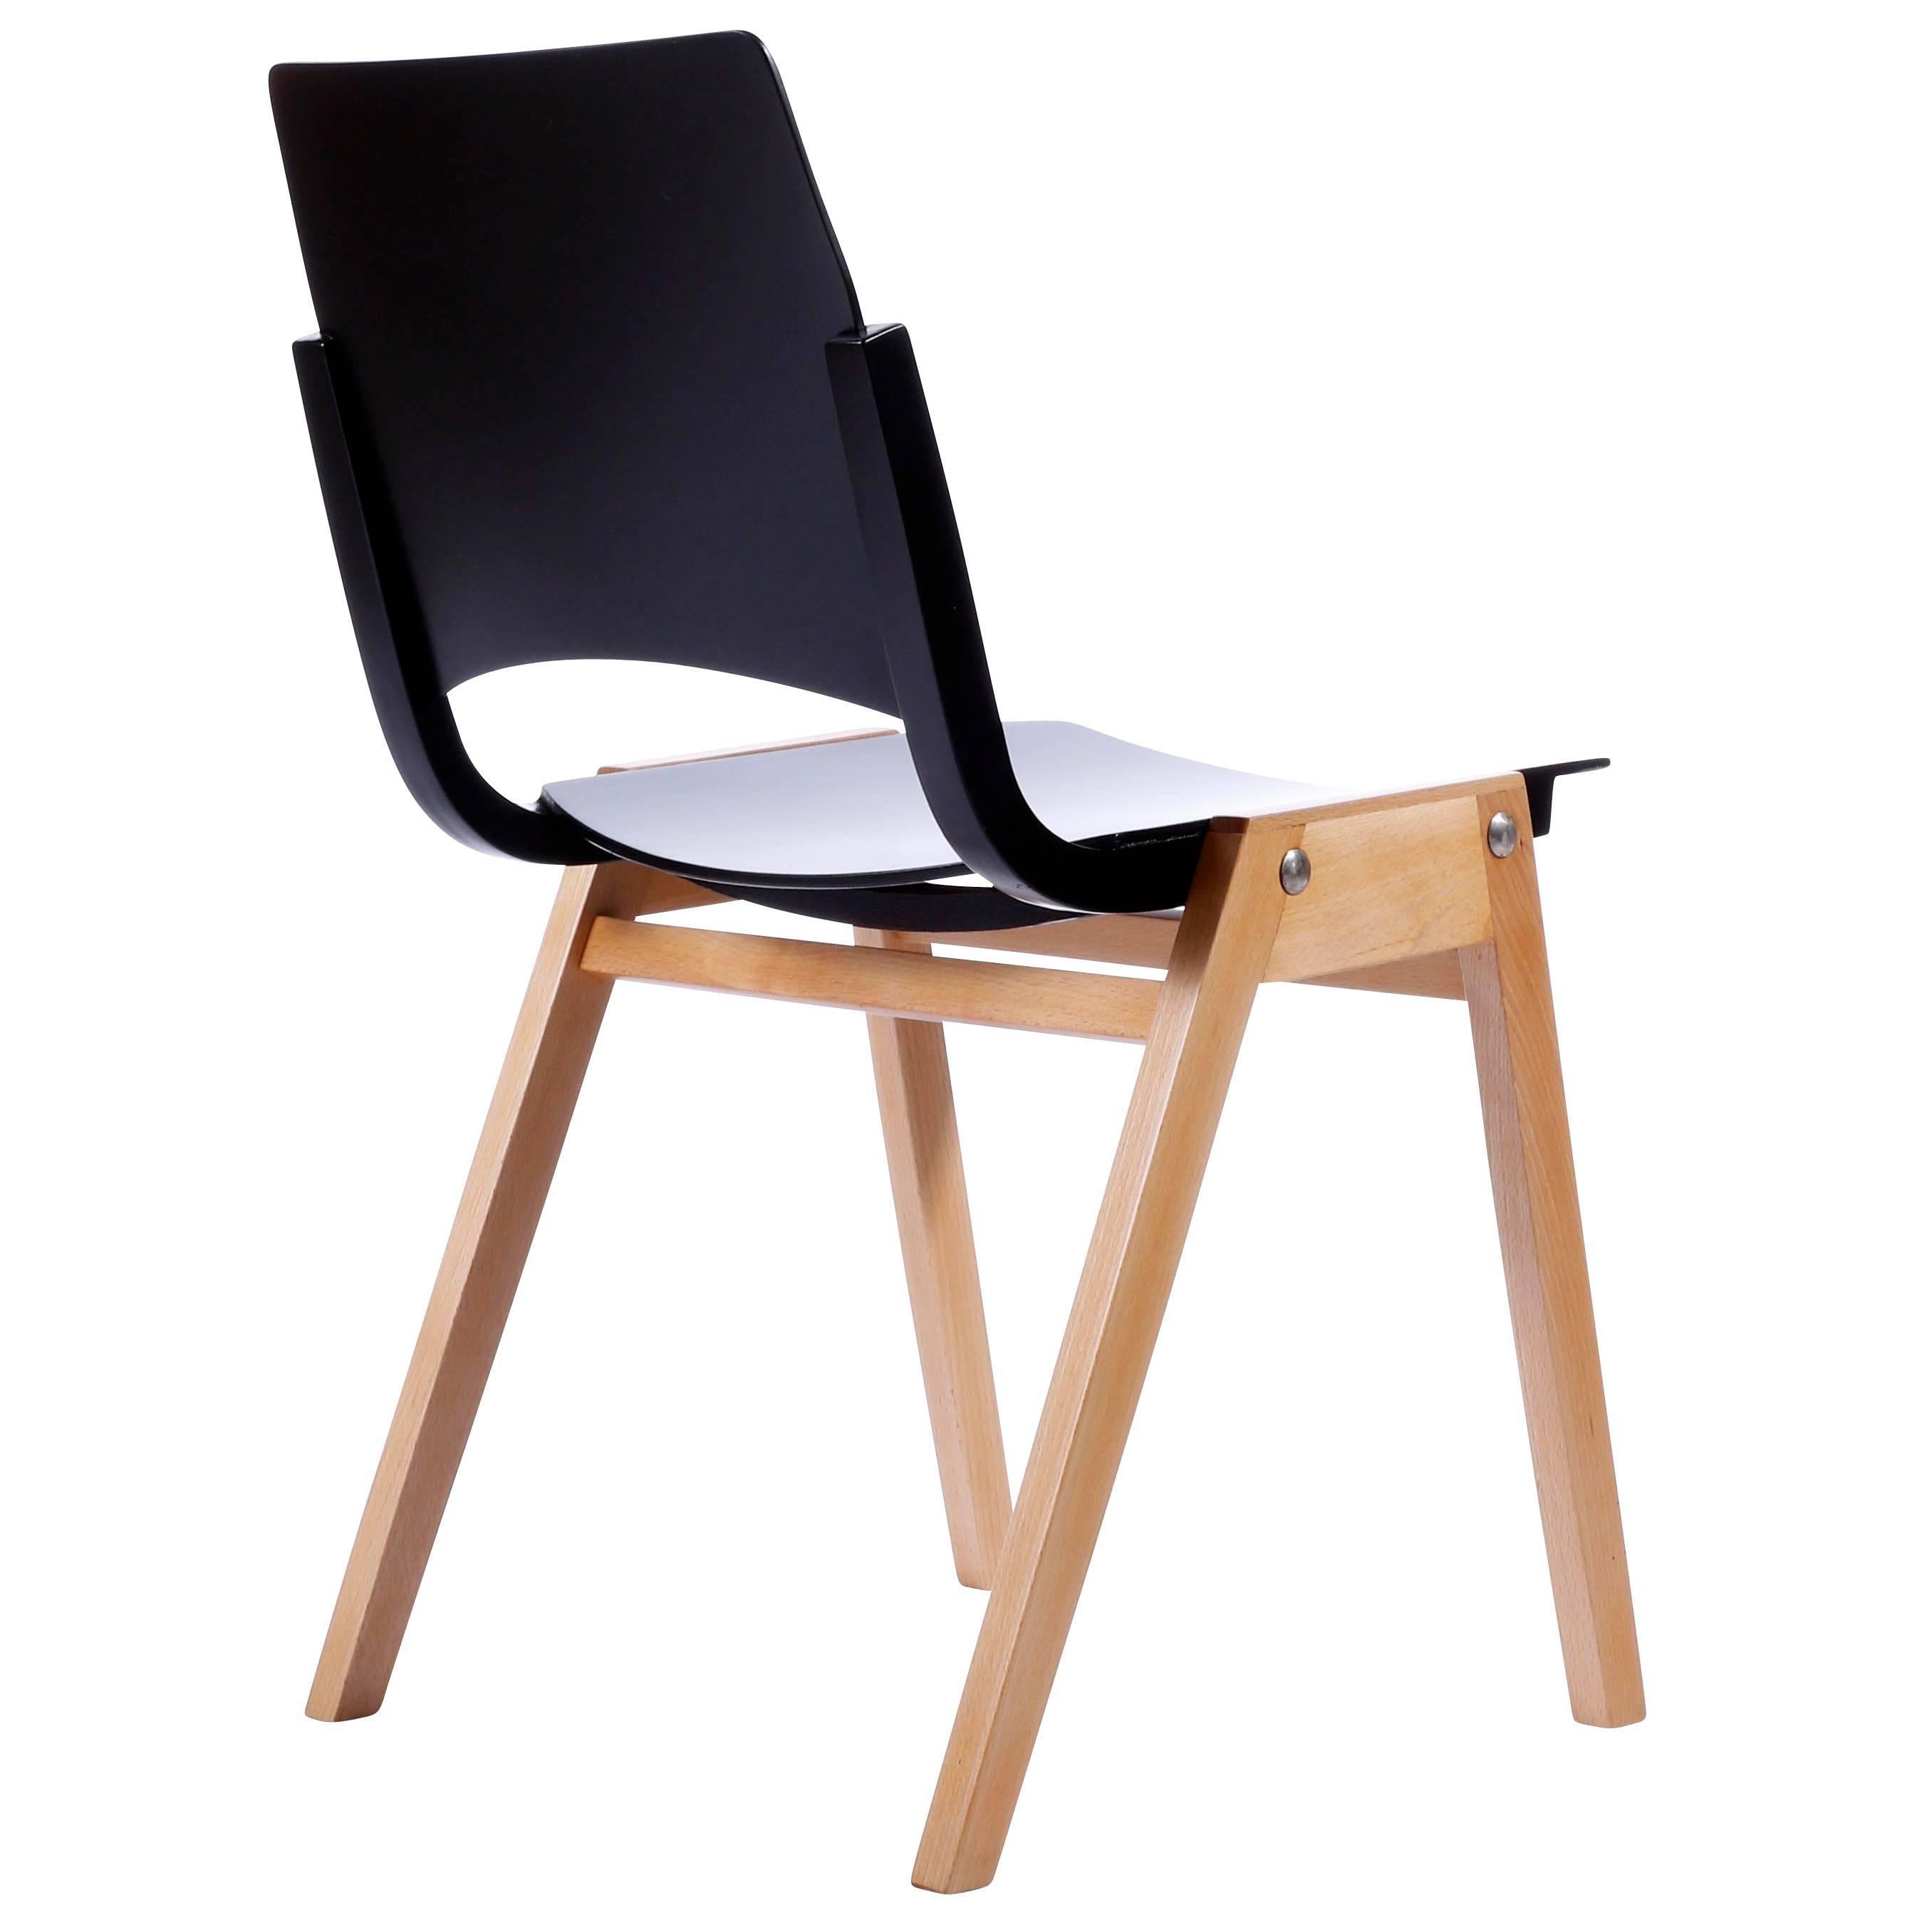 One of Ten Roland Rainer Stacking Chairs P7, Bicolored Beech Black Austria, 1952 1